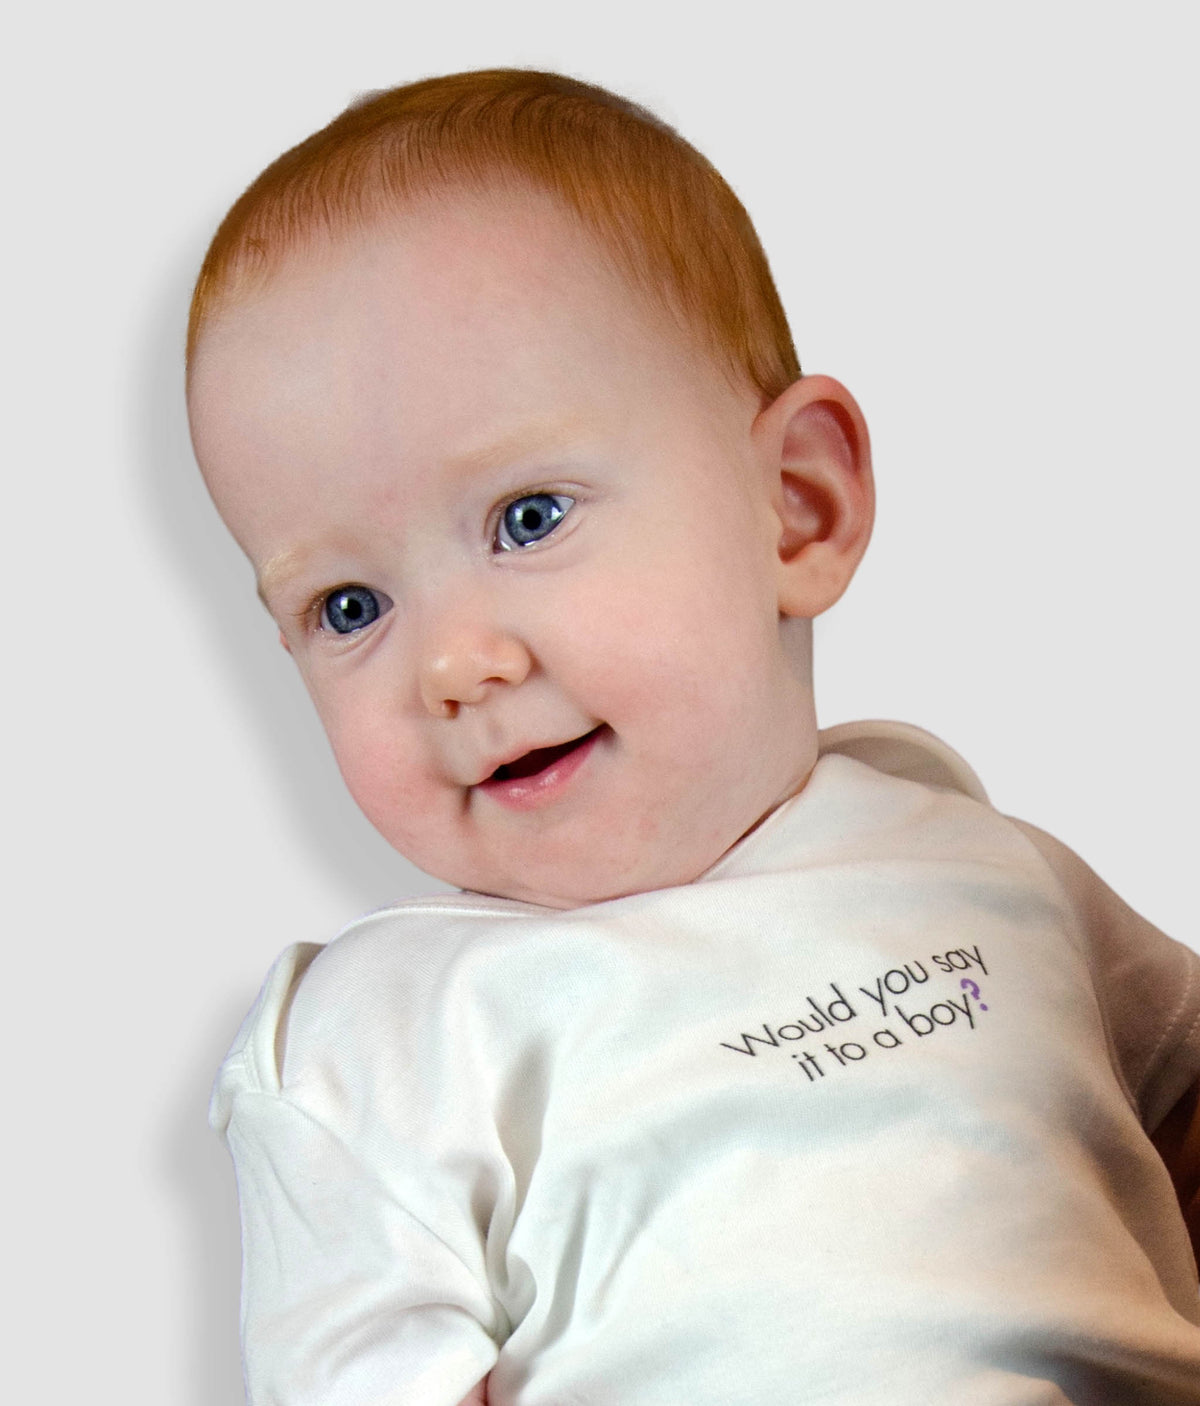 Feminist Babygrow - Would You Say It To A Boy, Bold